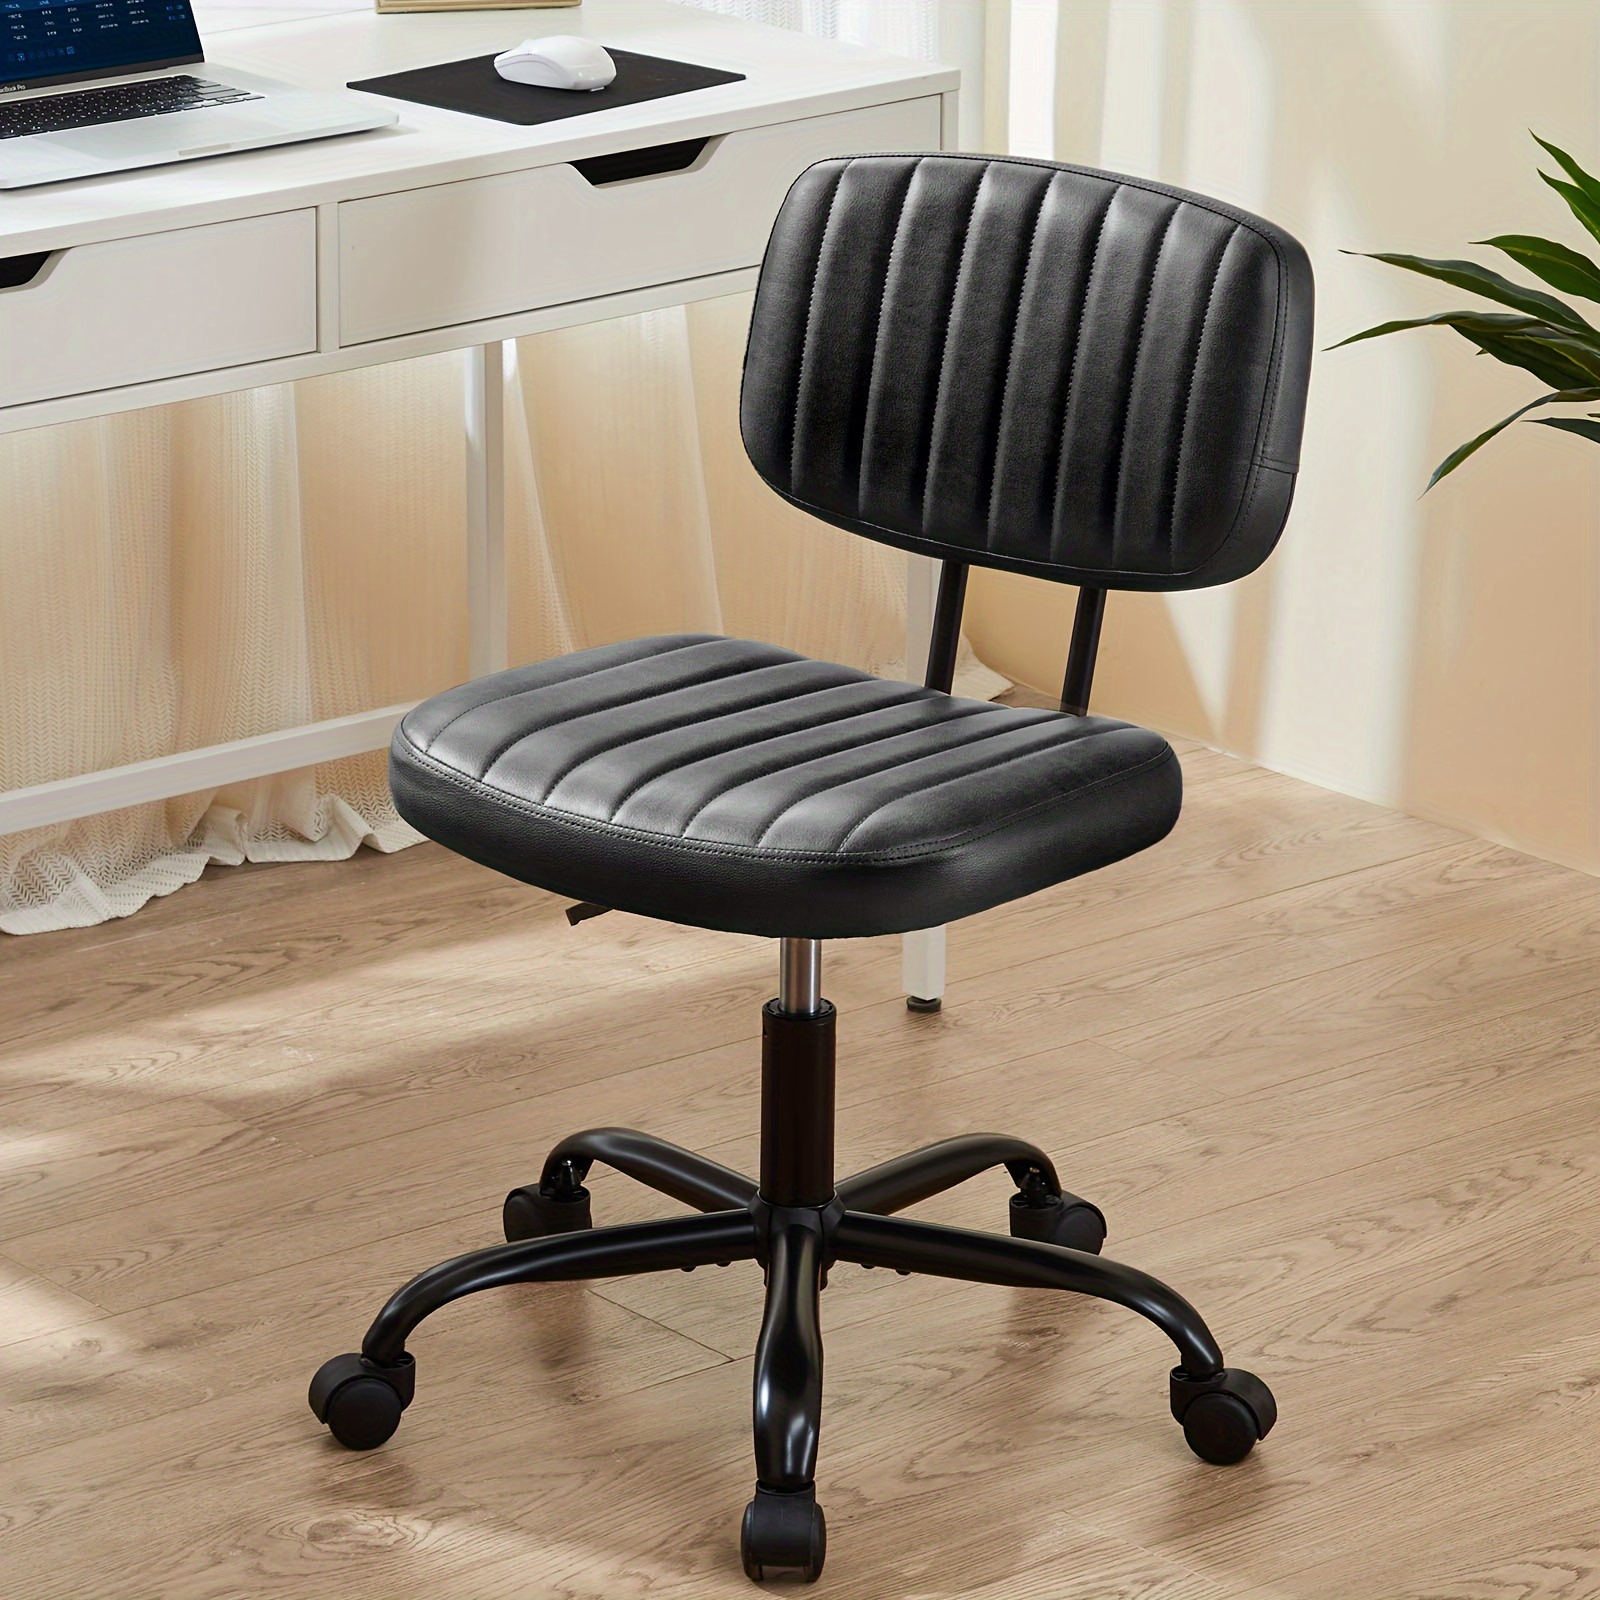 

Small Office Chair, Pu Leather Computer Desk Chair With Wheels And Lumbar Support, Comfy Cute Armless Vanity Rolling Swivel Task Chair No Arms For Home Office Study